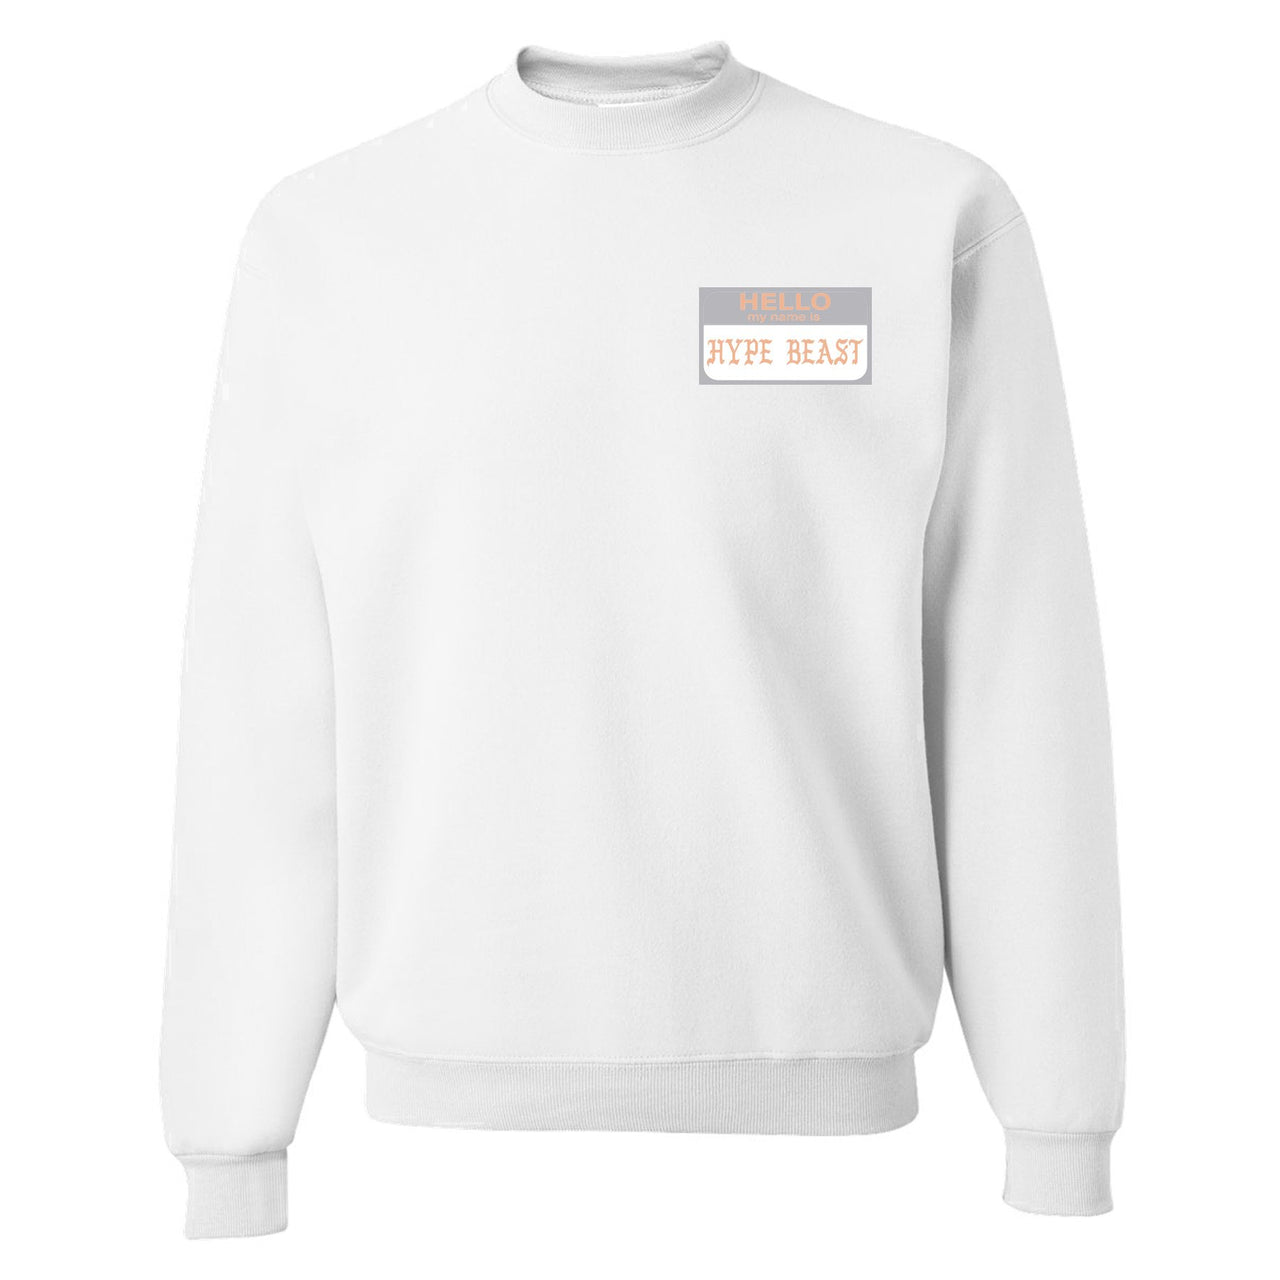 True Form v2 350s Crewneck Sweater | Hello My Name Is Hype Beast Pablo, White